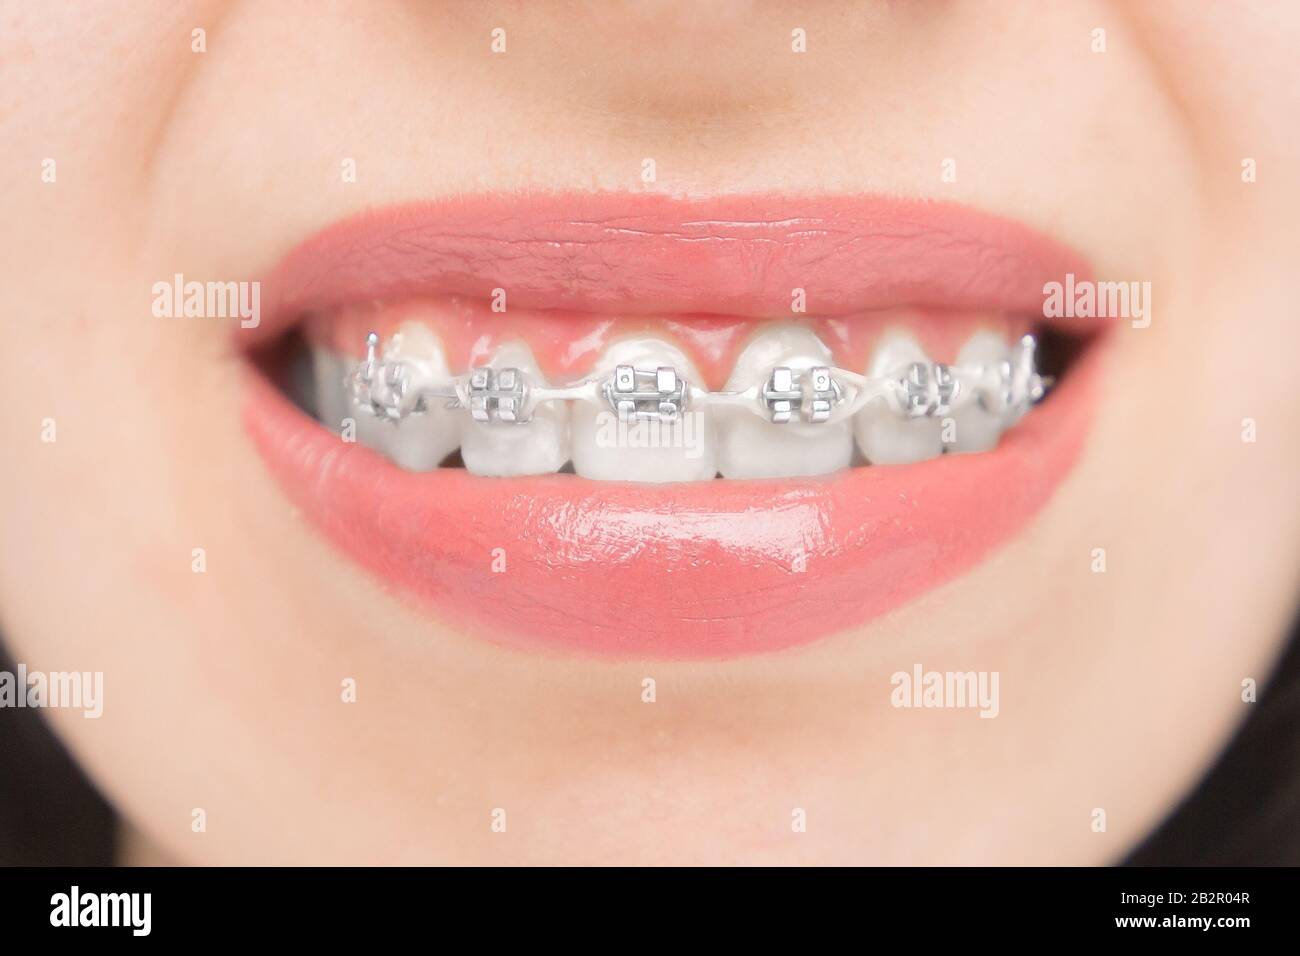 Close Up To Dental Braces Brackets On The Teeth After Whitening Self Ligating Brackets With Metal Ties And Gray Elastics Or Rubber Bands Stock Photo Alamy